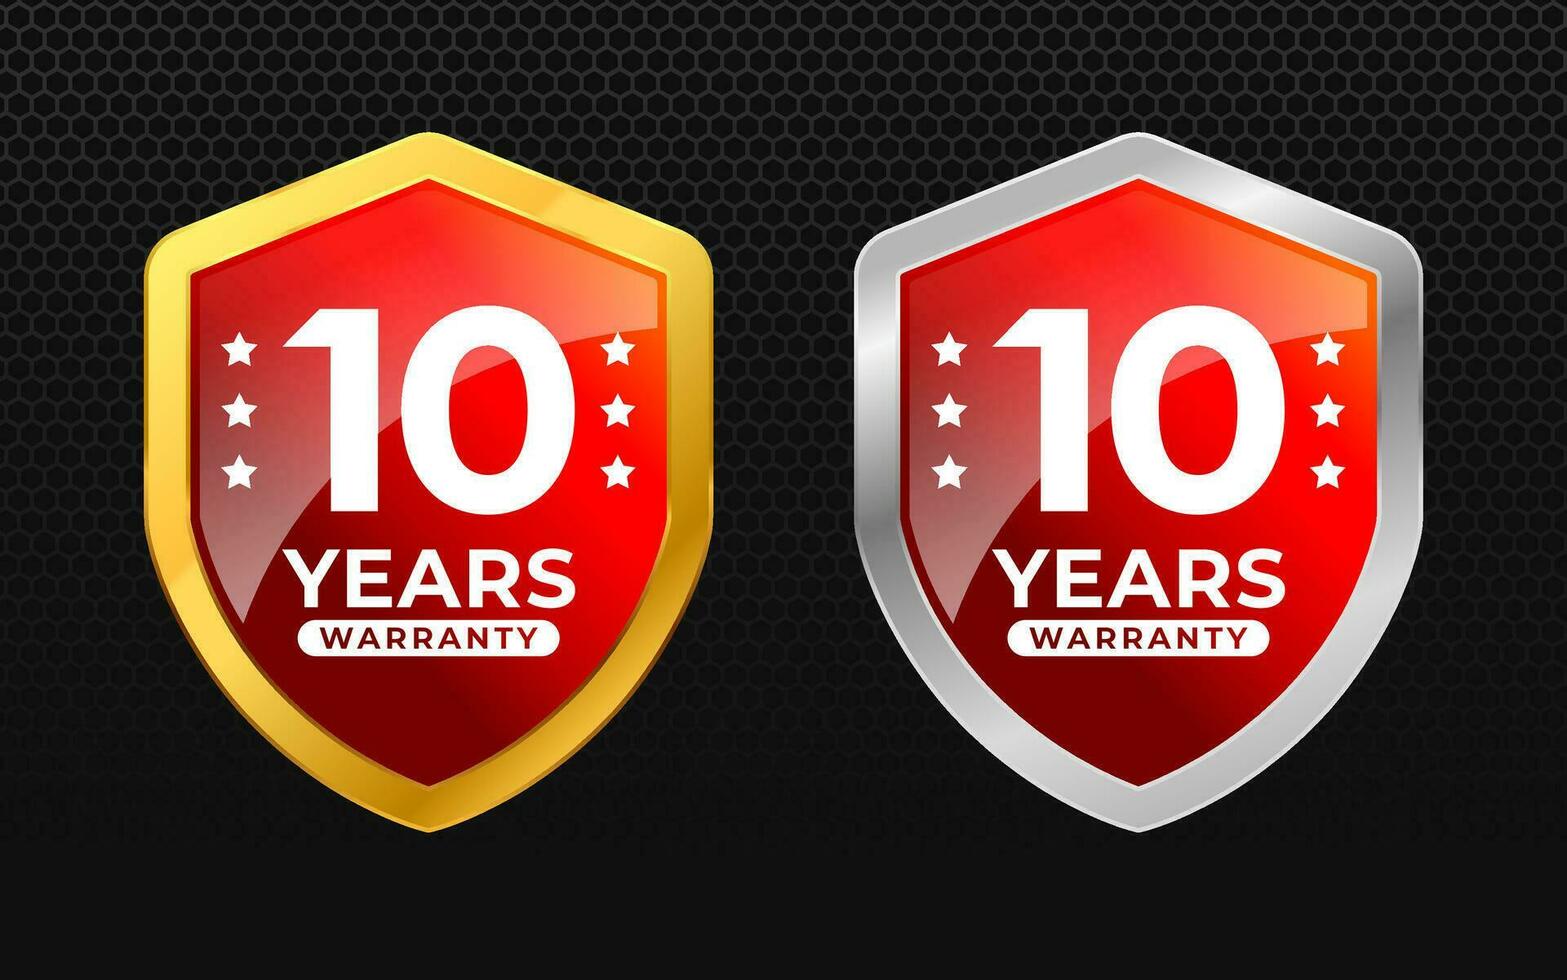 10 years warranty with glossy gold and silver vector shield shape. for label, seal, stamp, icon, logo, badge, symbol, sticker, button